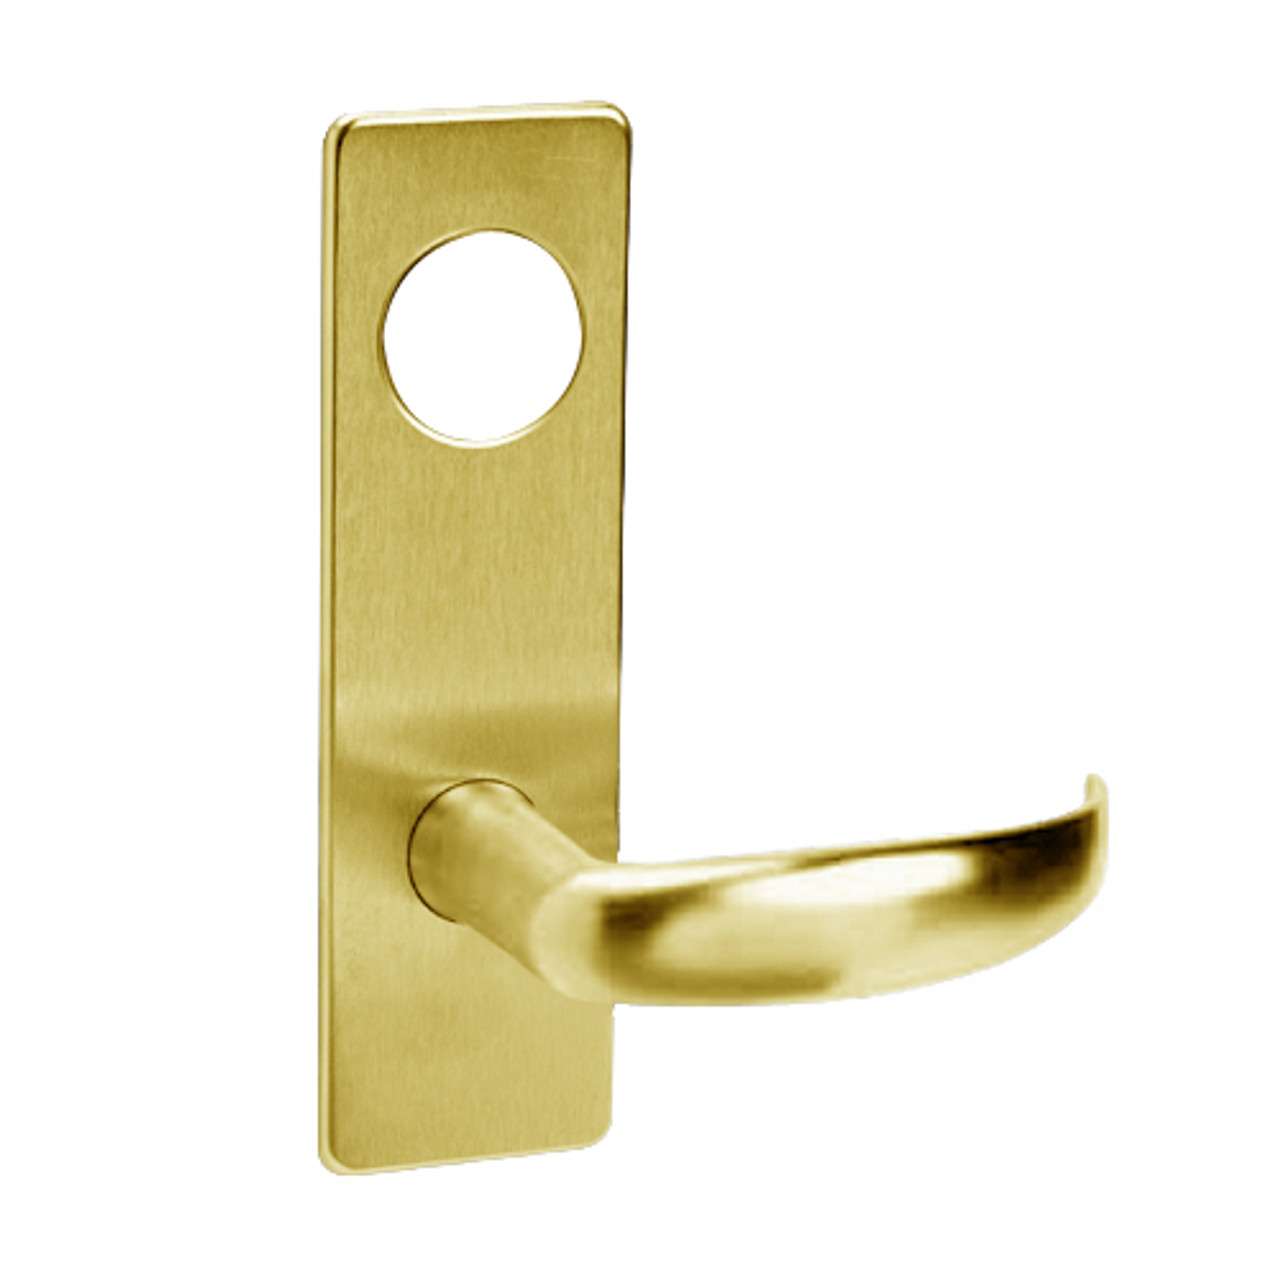 ML2065-PSR-605-M31 Corbin Russwin ML2000 Series Mortise Dormitory Trim Pack with Princeton Lever in Bright Brass